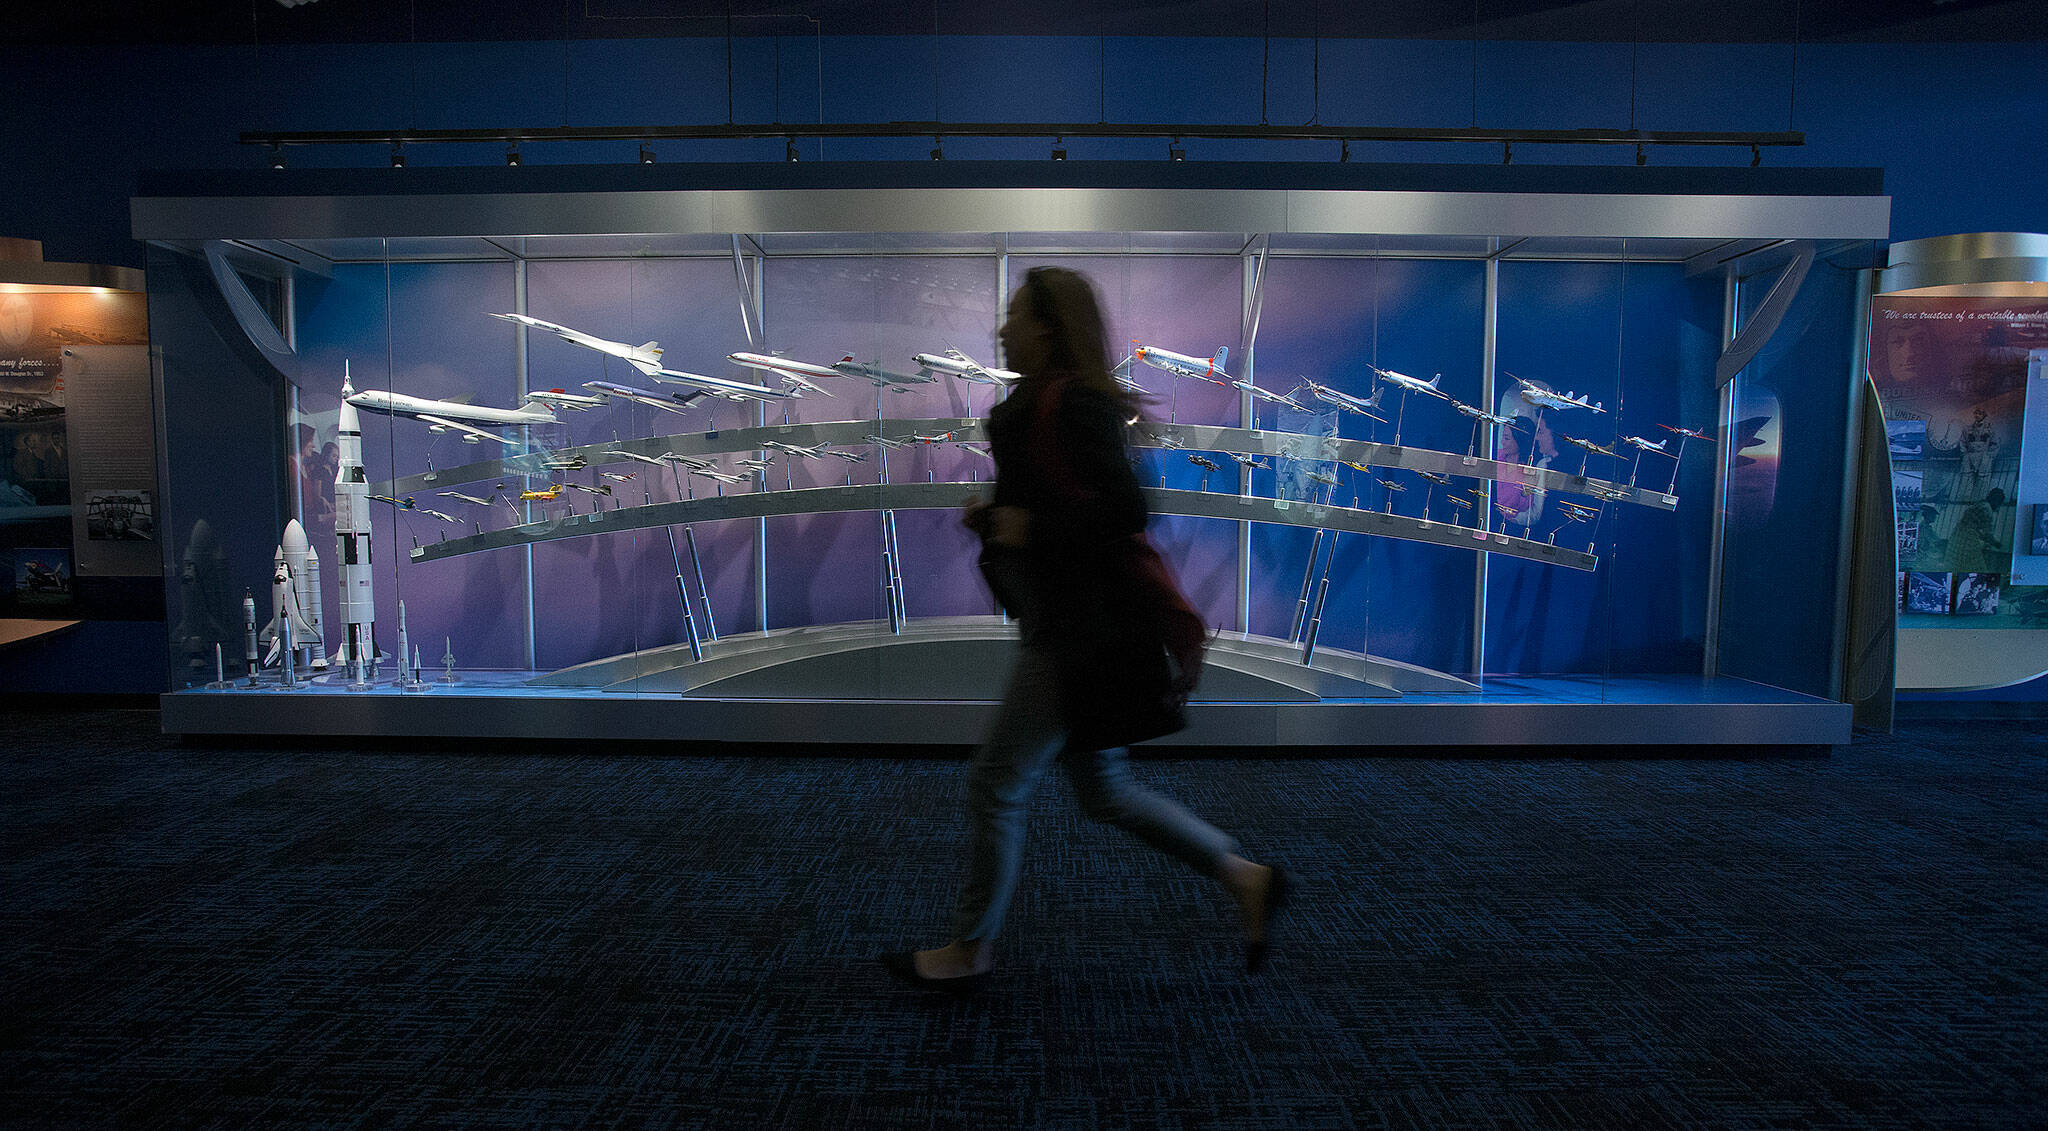 As a call to line up for the Boeing Assembly plant is called out, a tourist runs past a display of Boeing airplanes at the Future of Flight Museum in Everett, Washington. (Andy Bronson / The Herald)